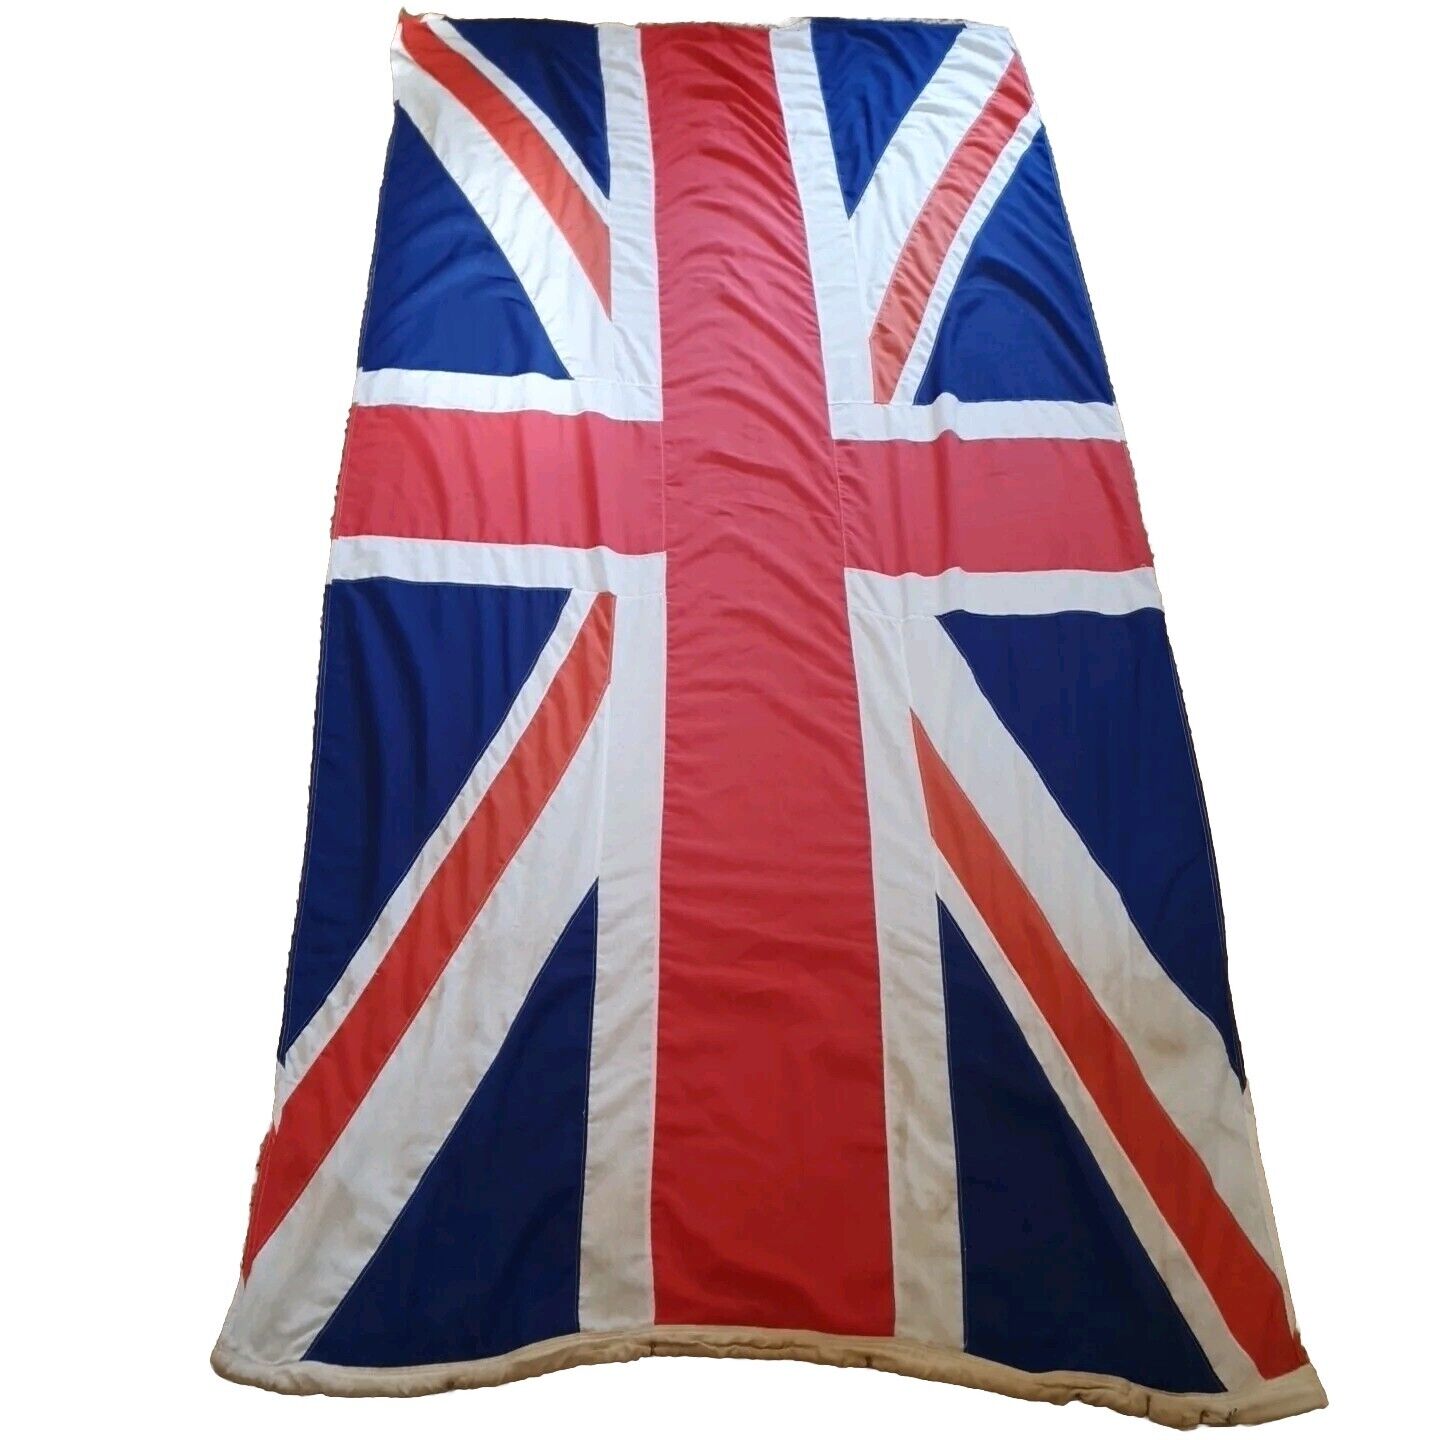 VINTAGE UNION JACK FLAG LINEN STITCHED PANEL With Brass Fittings Aprox 9x4 Foot